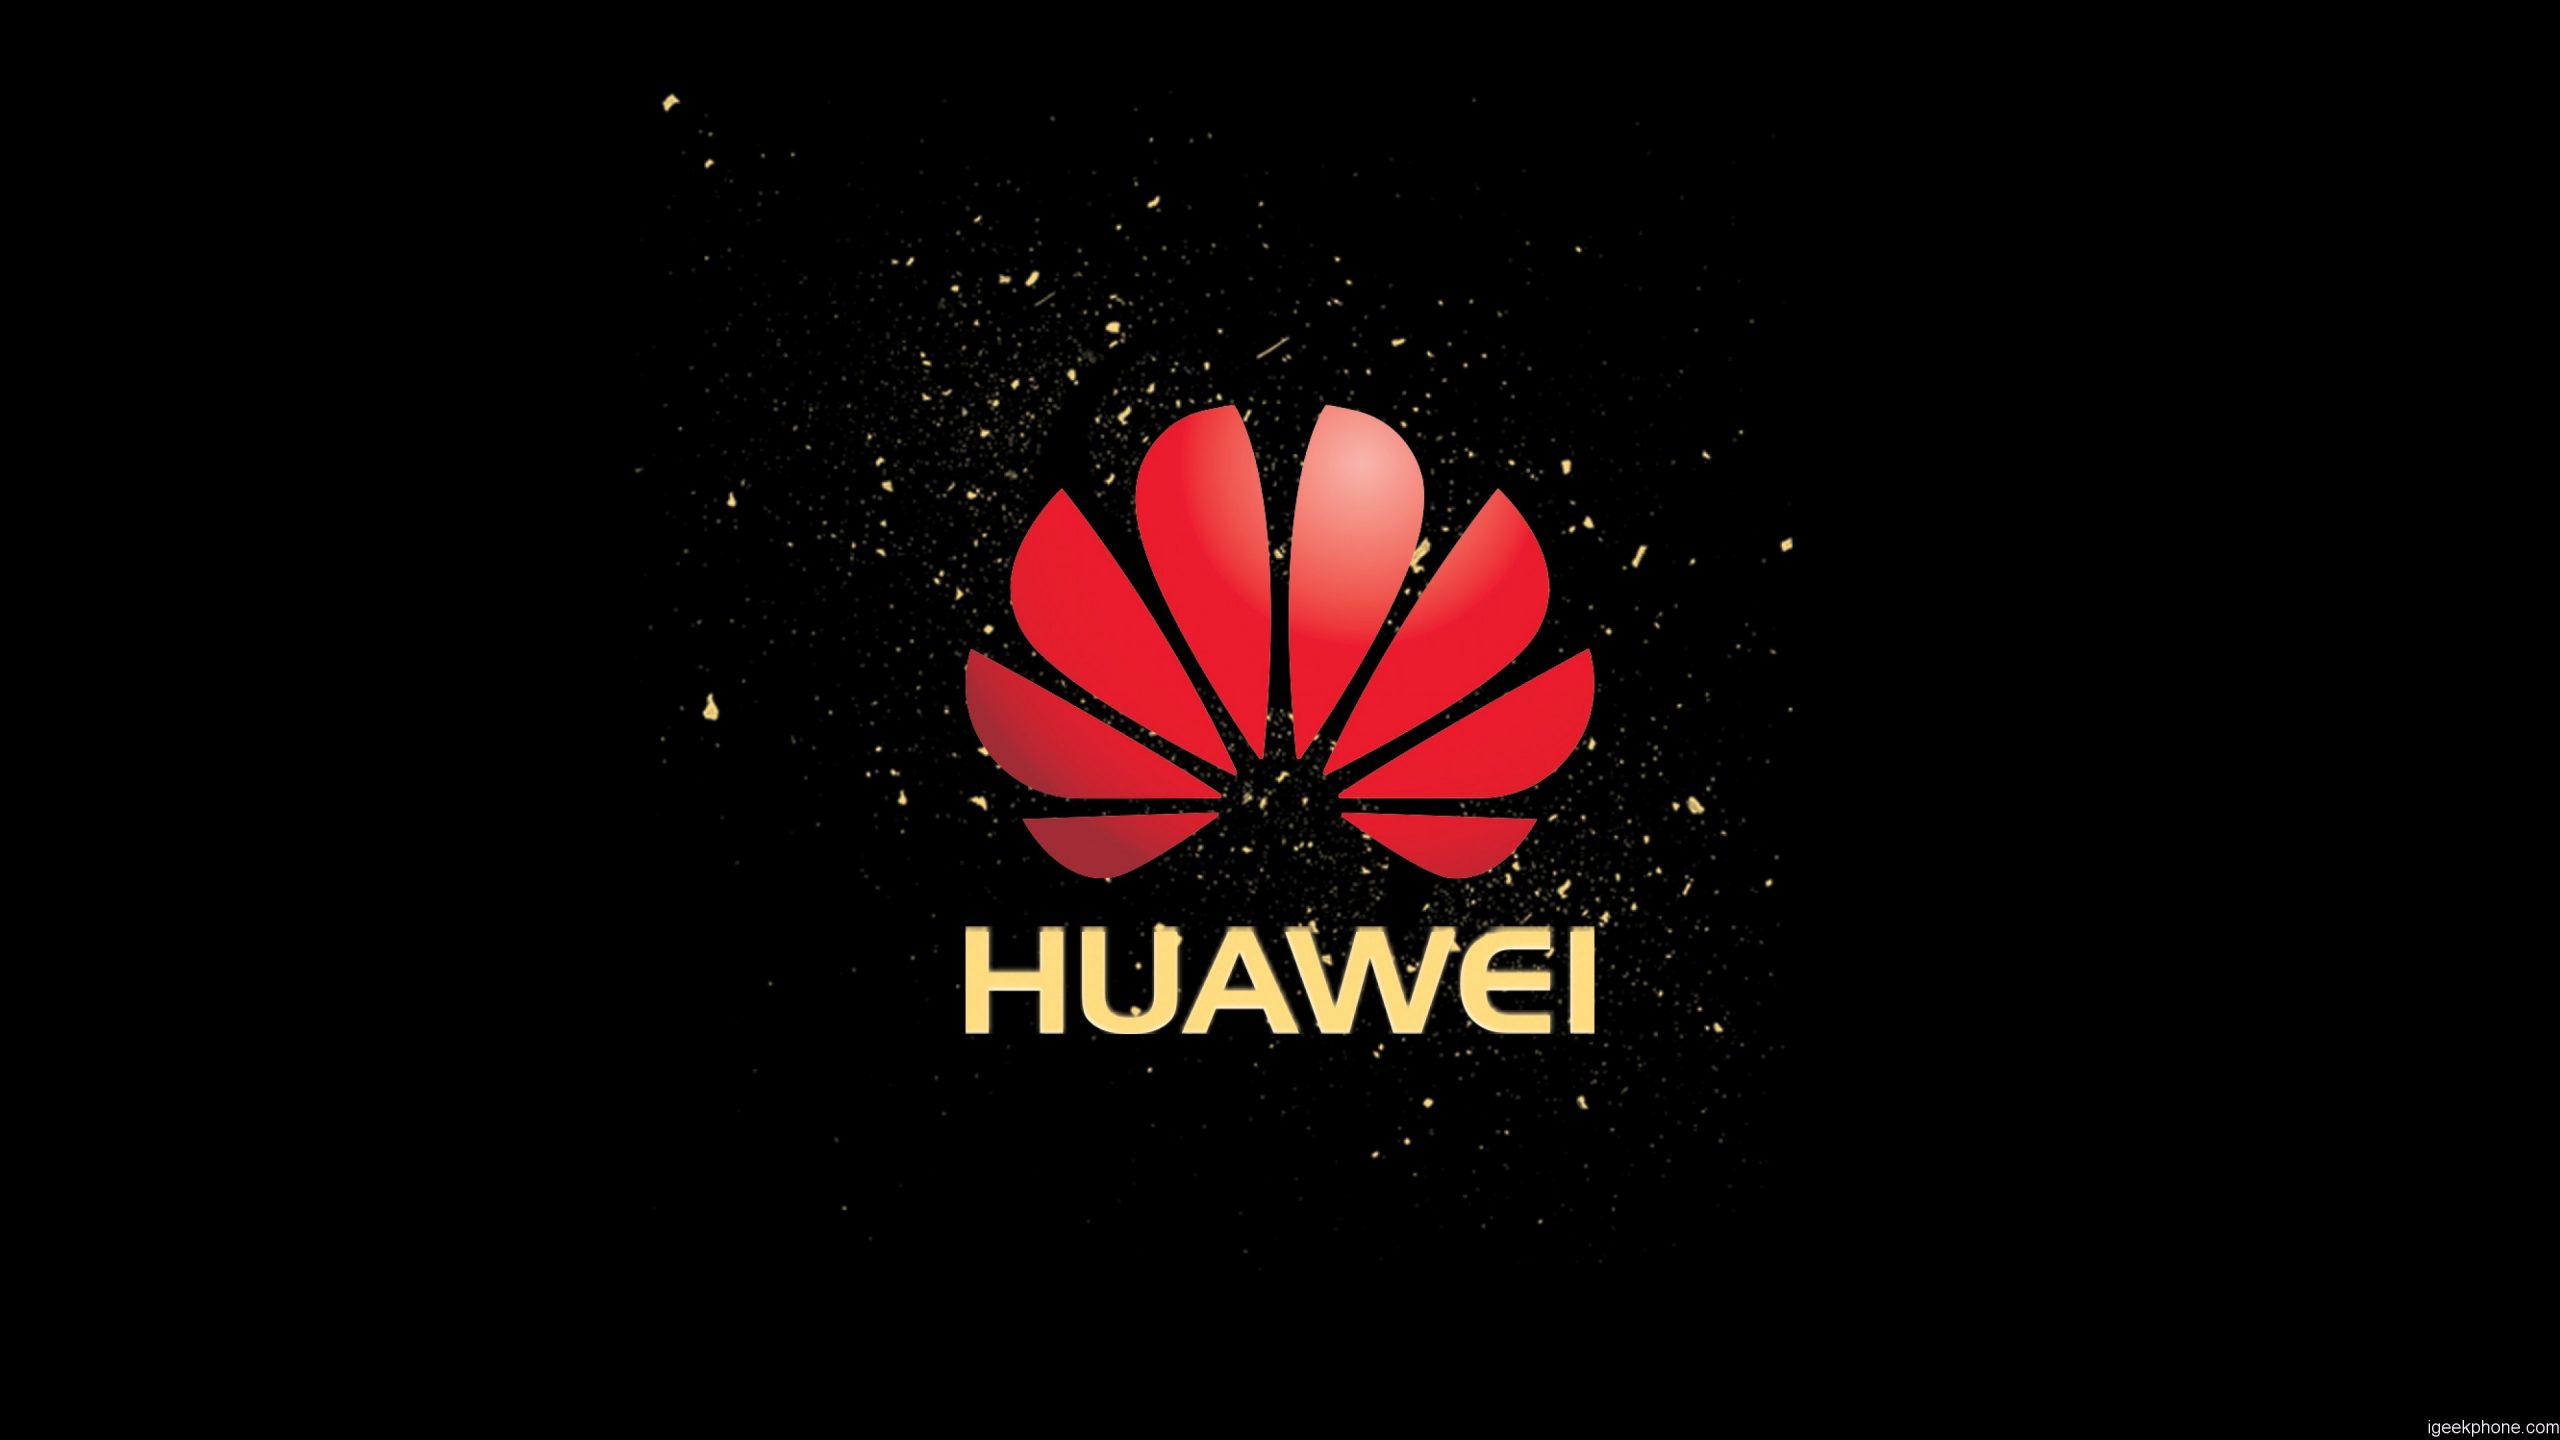 Huawei invests $60 million in Angola technological centers